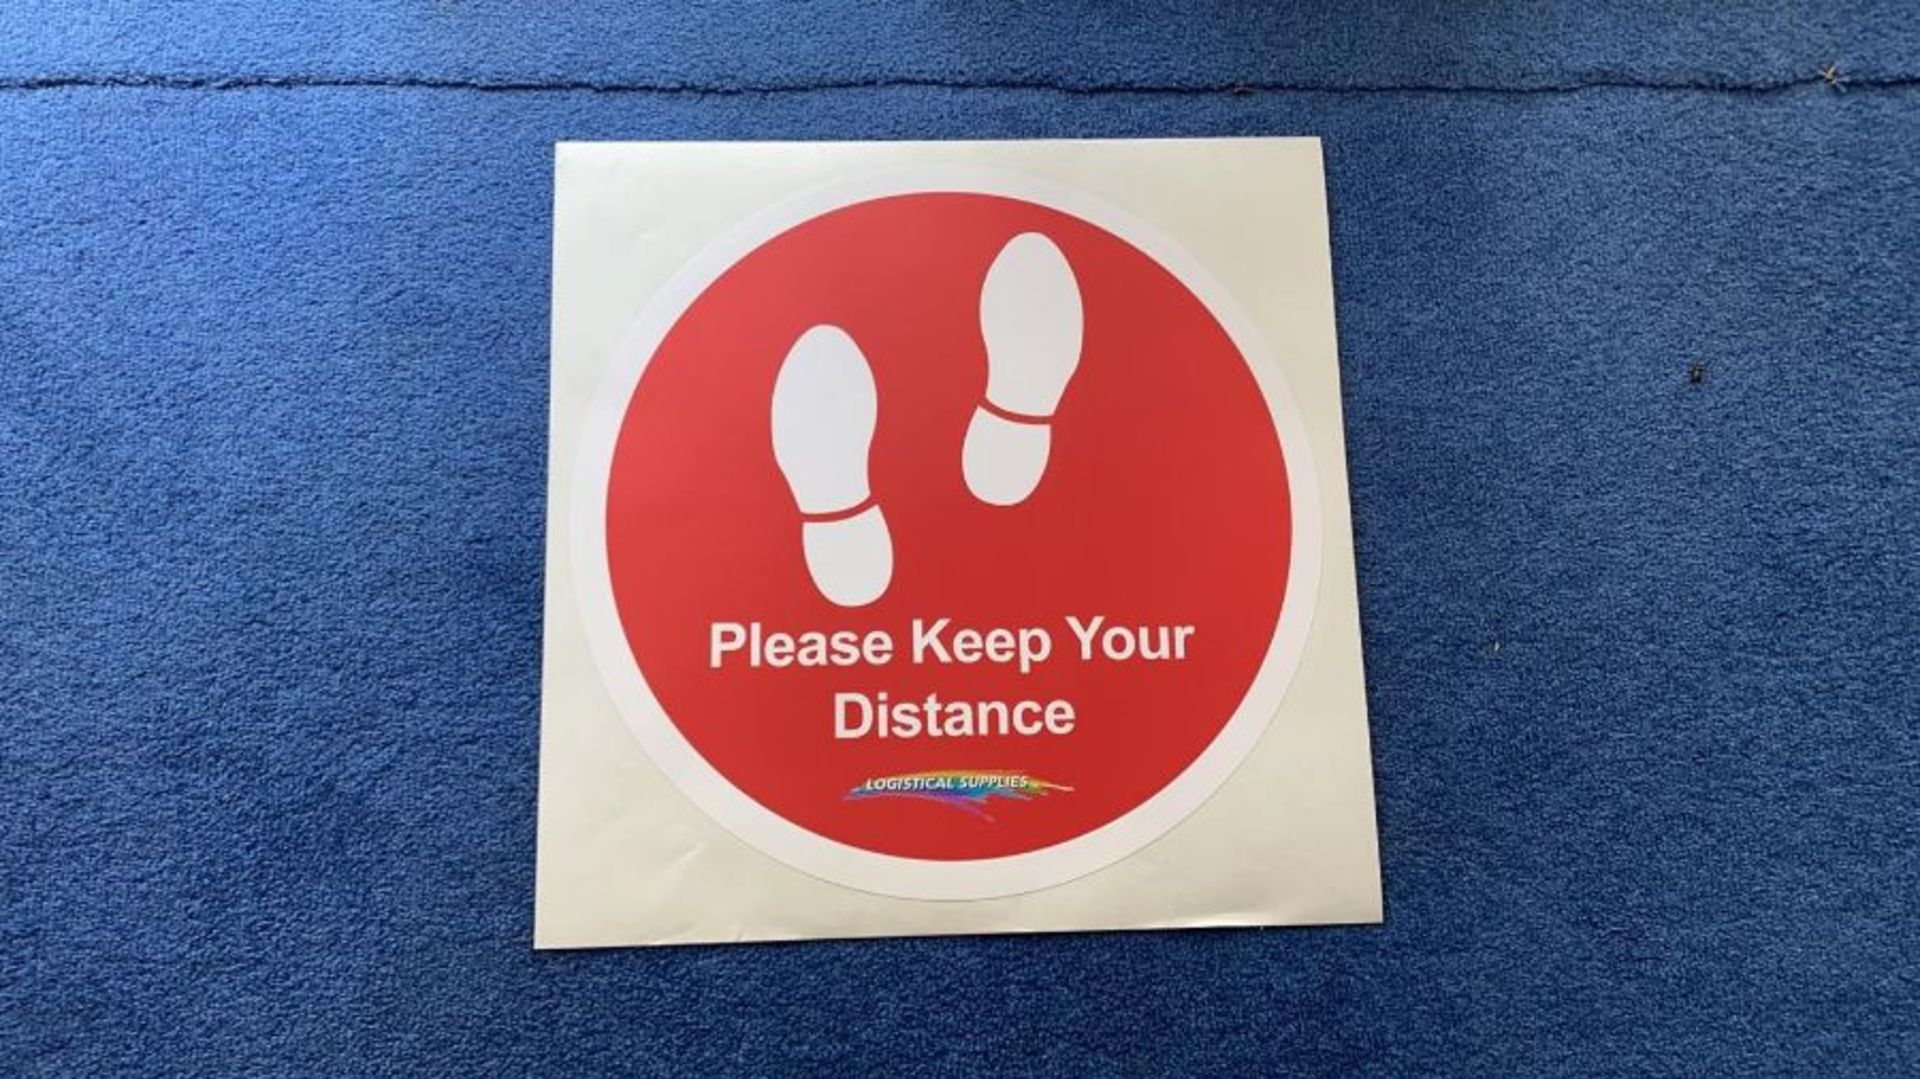 Vinyl Sticker Floor - Keep Your Distance (Quantity 20). Long lasting with strong adhesive. Clear